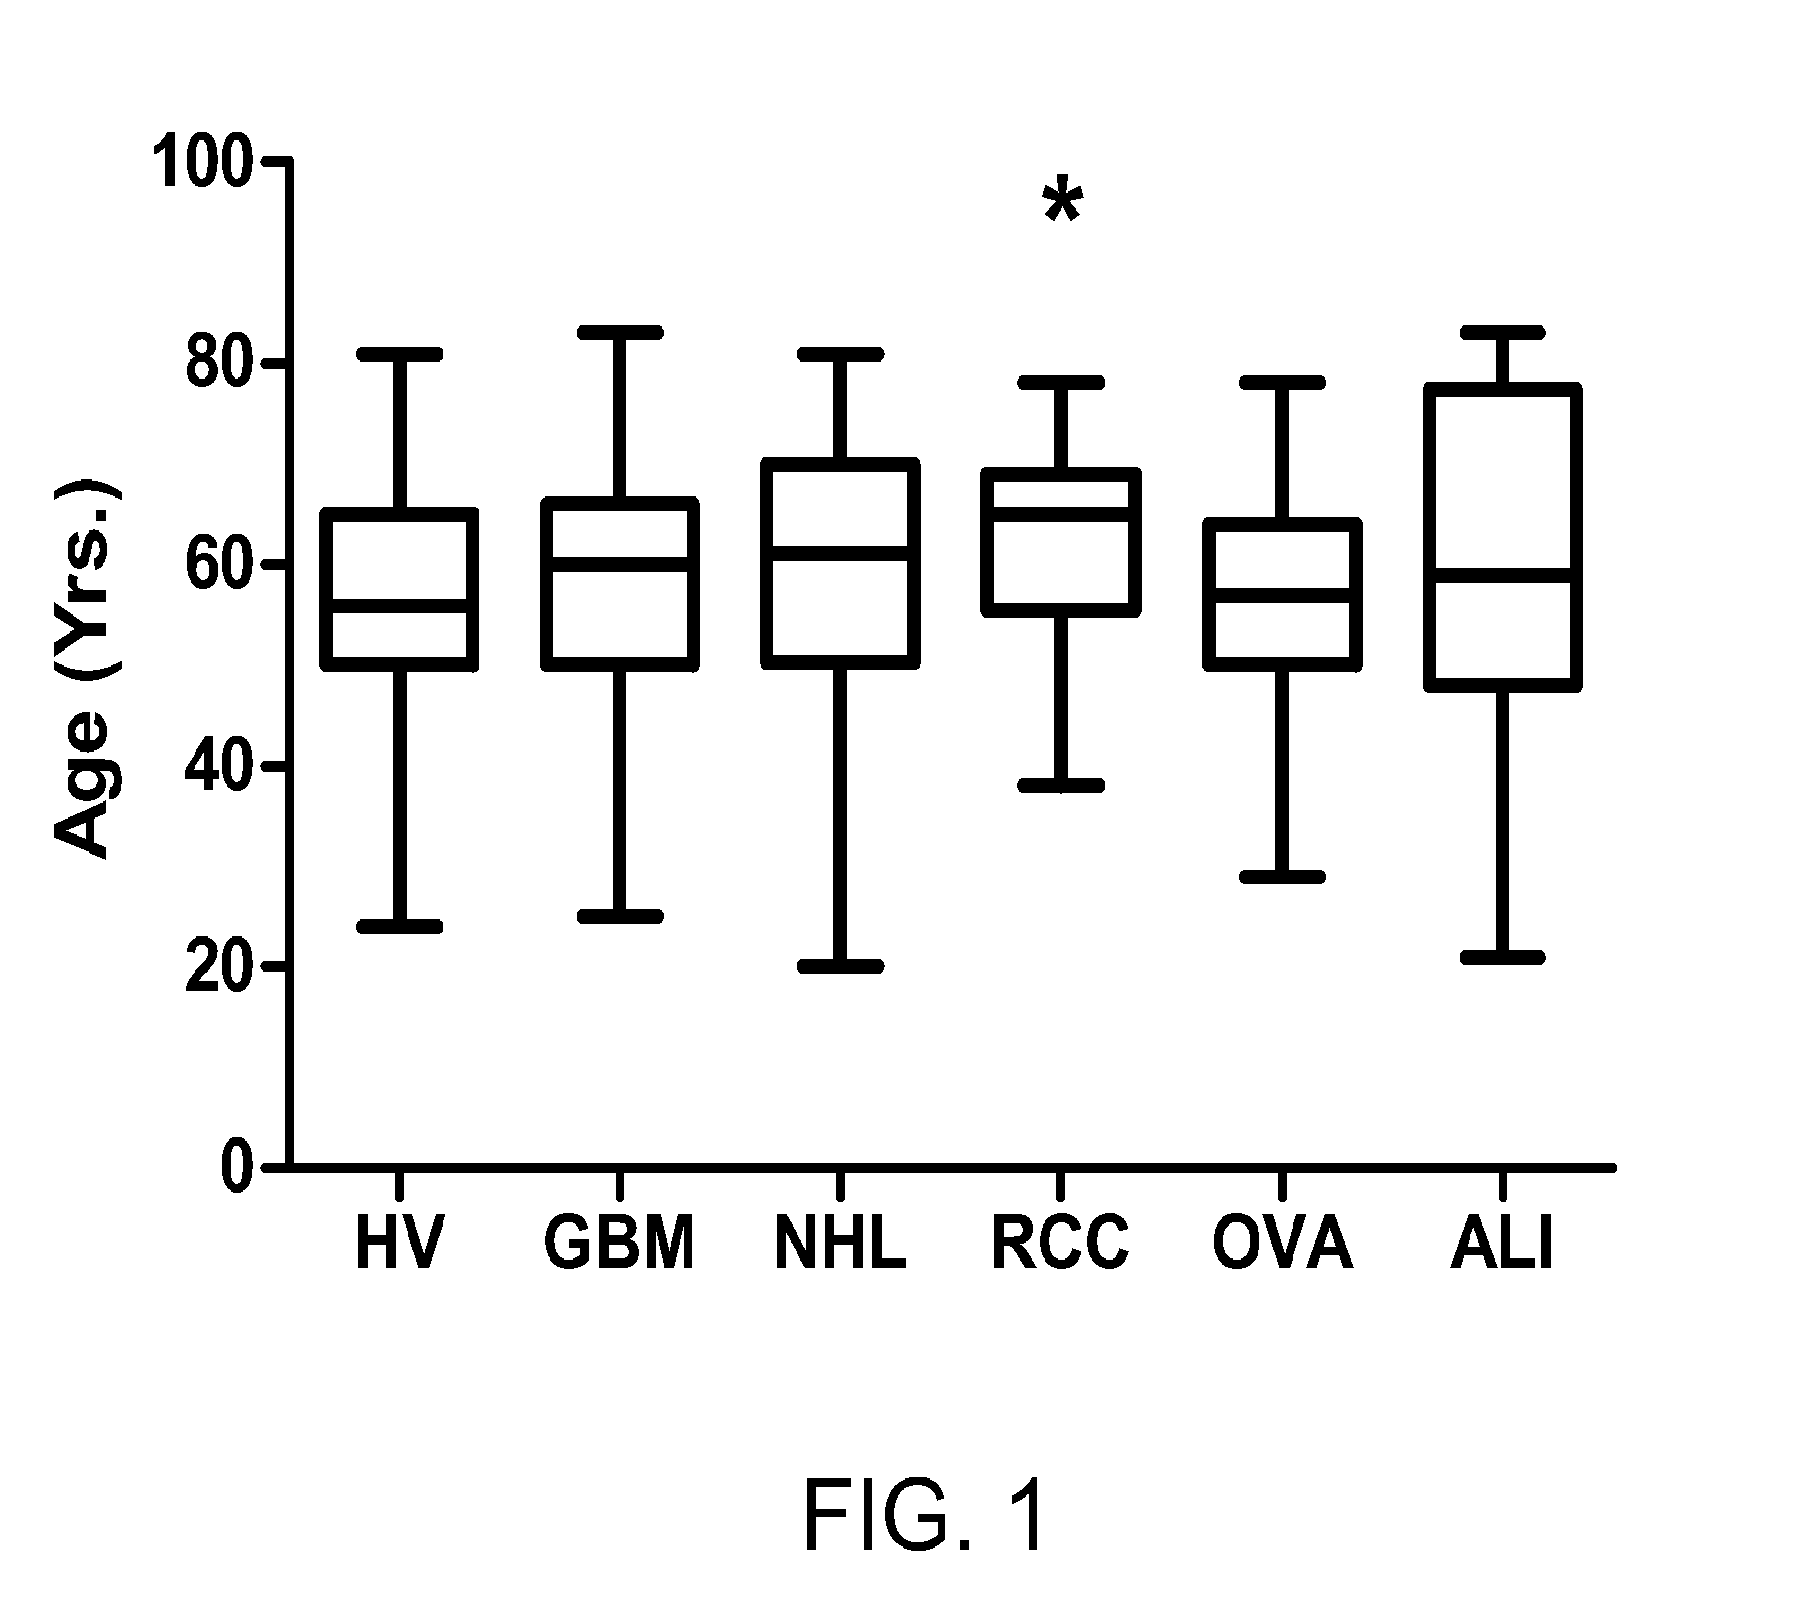 Methods and materials for assessing immune system profiles